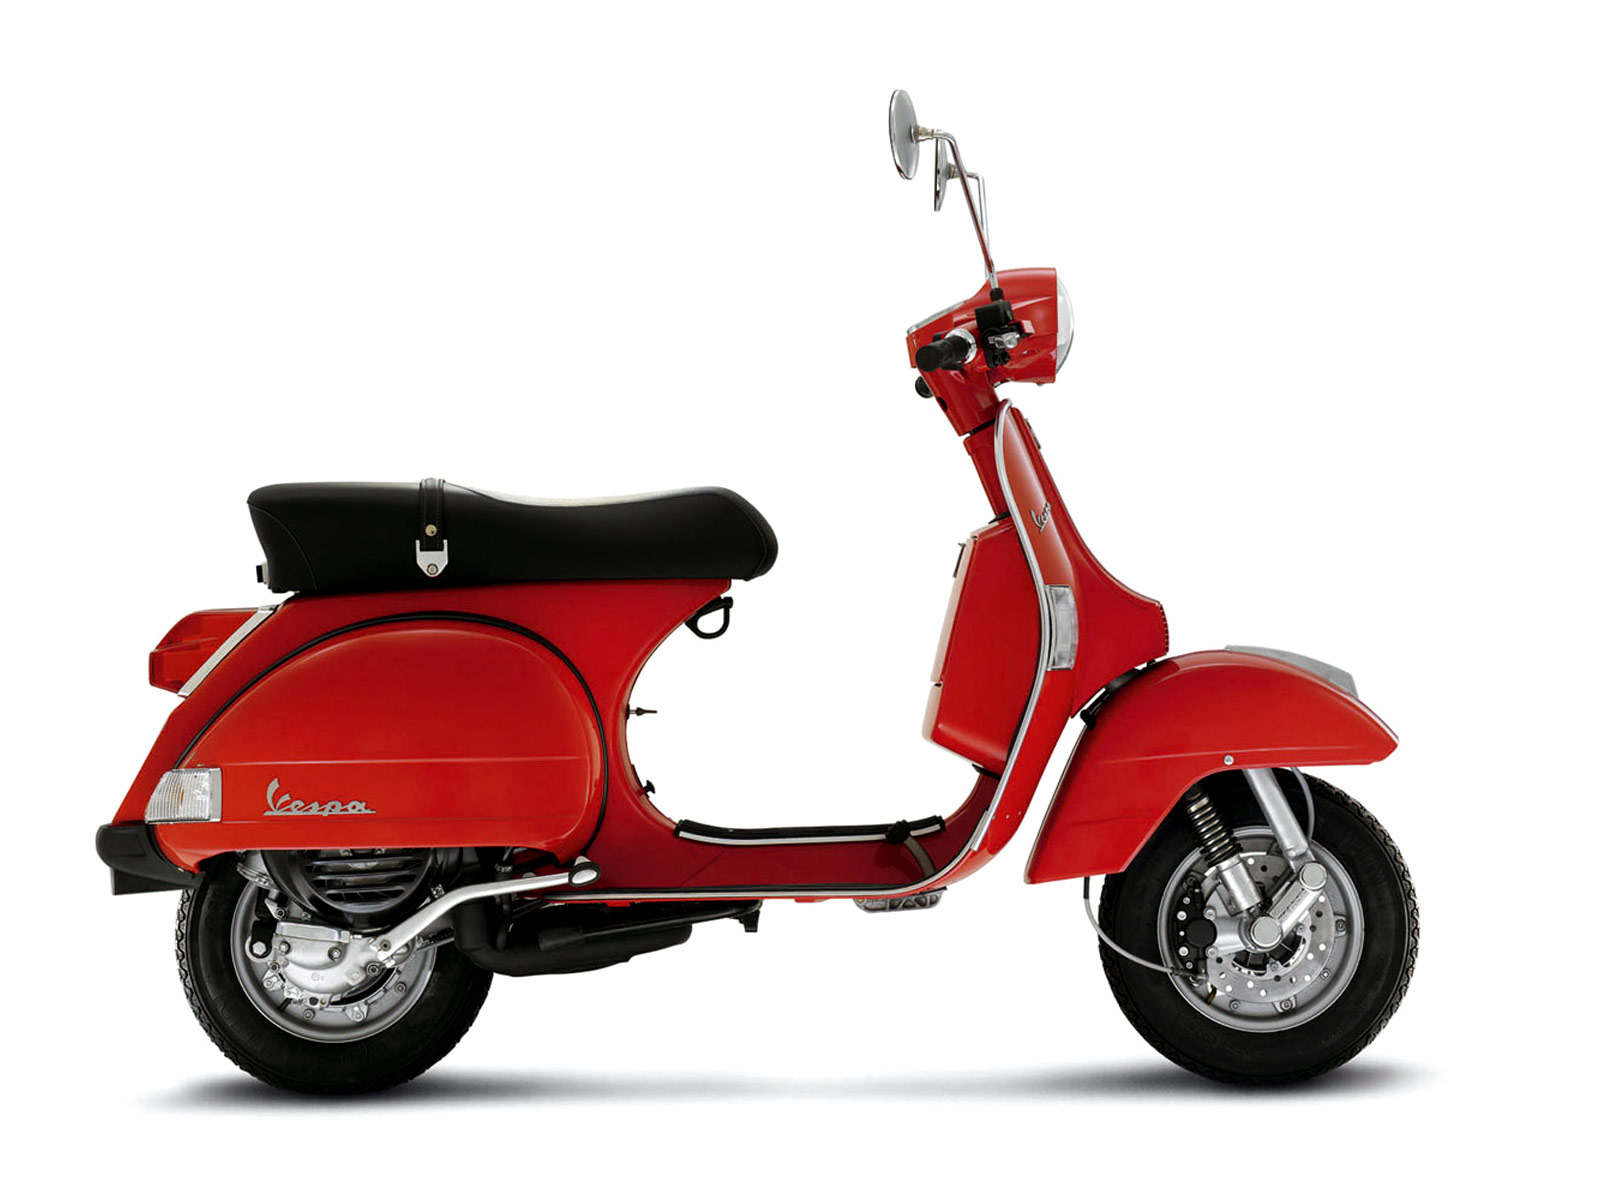  /hSuXEEVqlT4/s1600/2011_VESPA_PX_125_scooter-wallpapers_4. title=